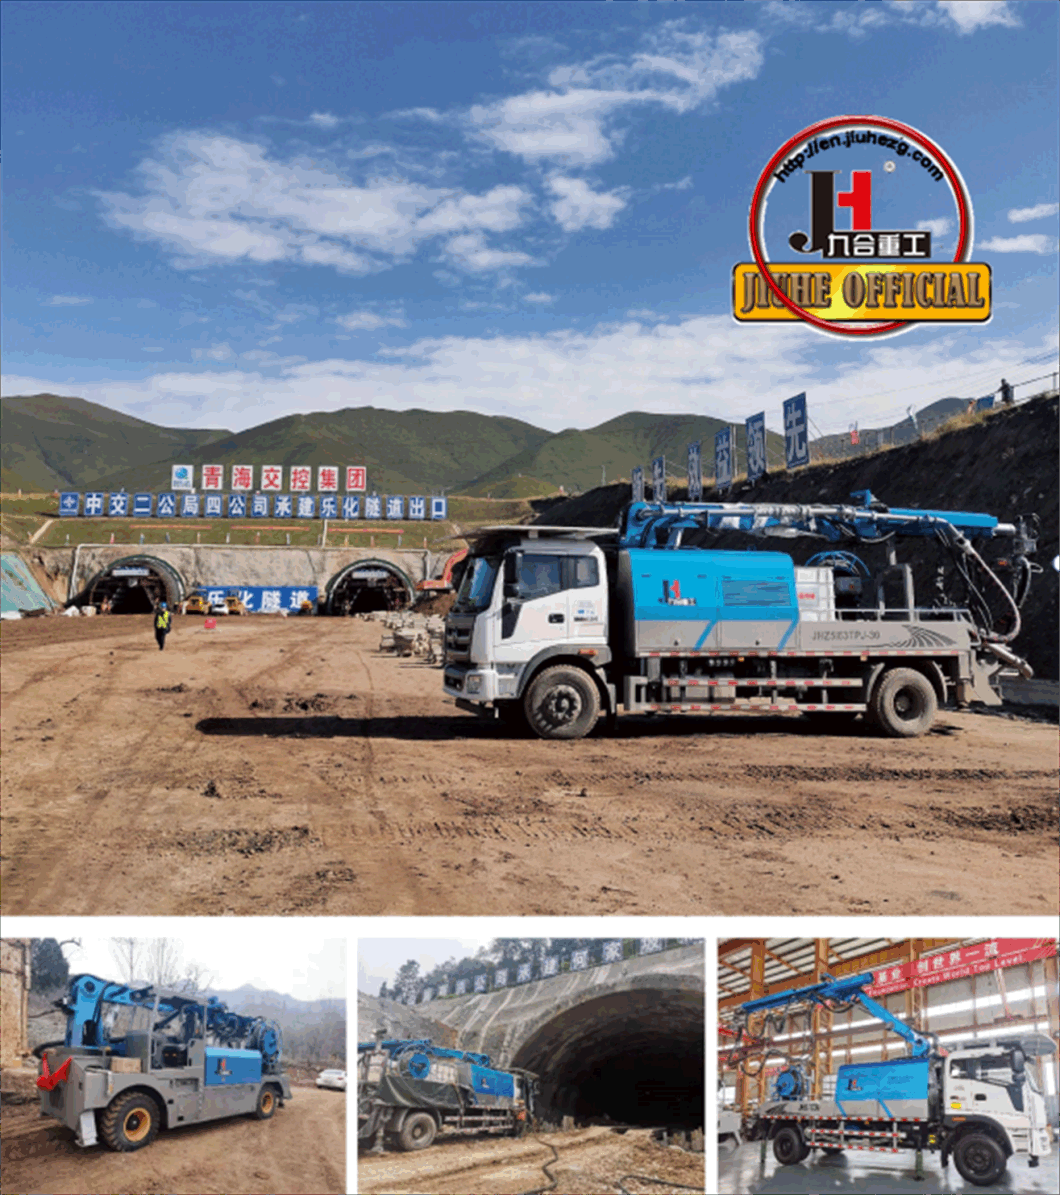 Hot Sale Manufacturer Jiuhe Brand Jhstc30 Wet Shotcrete Truck for with Foton Chassis Concrete Spraying Truck for Construction Site